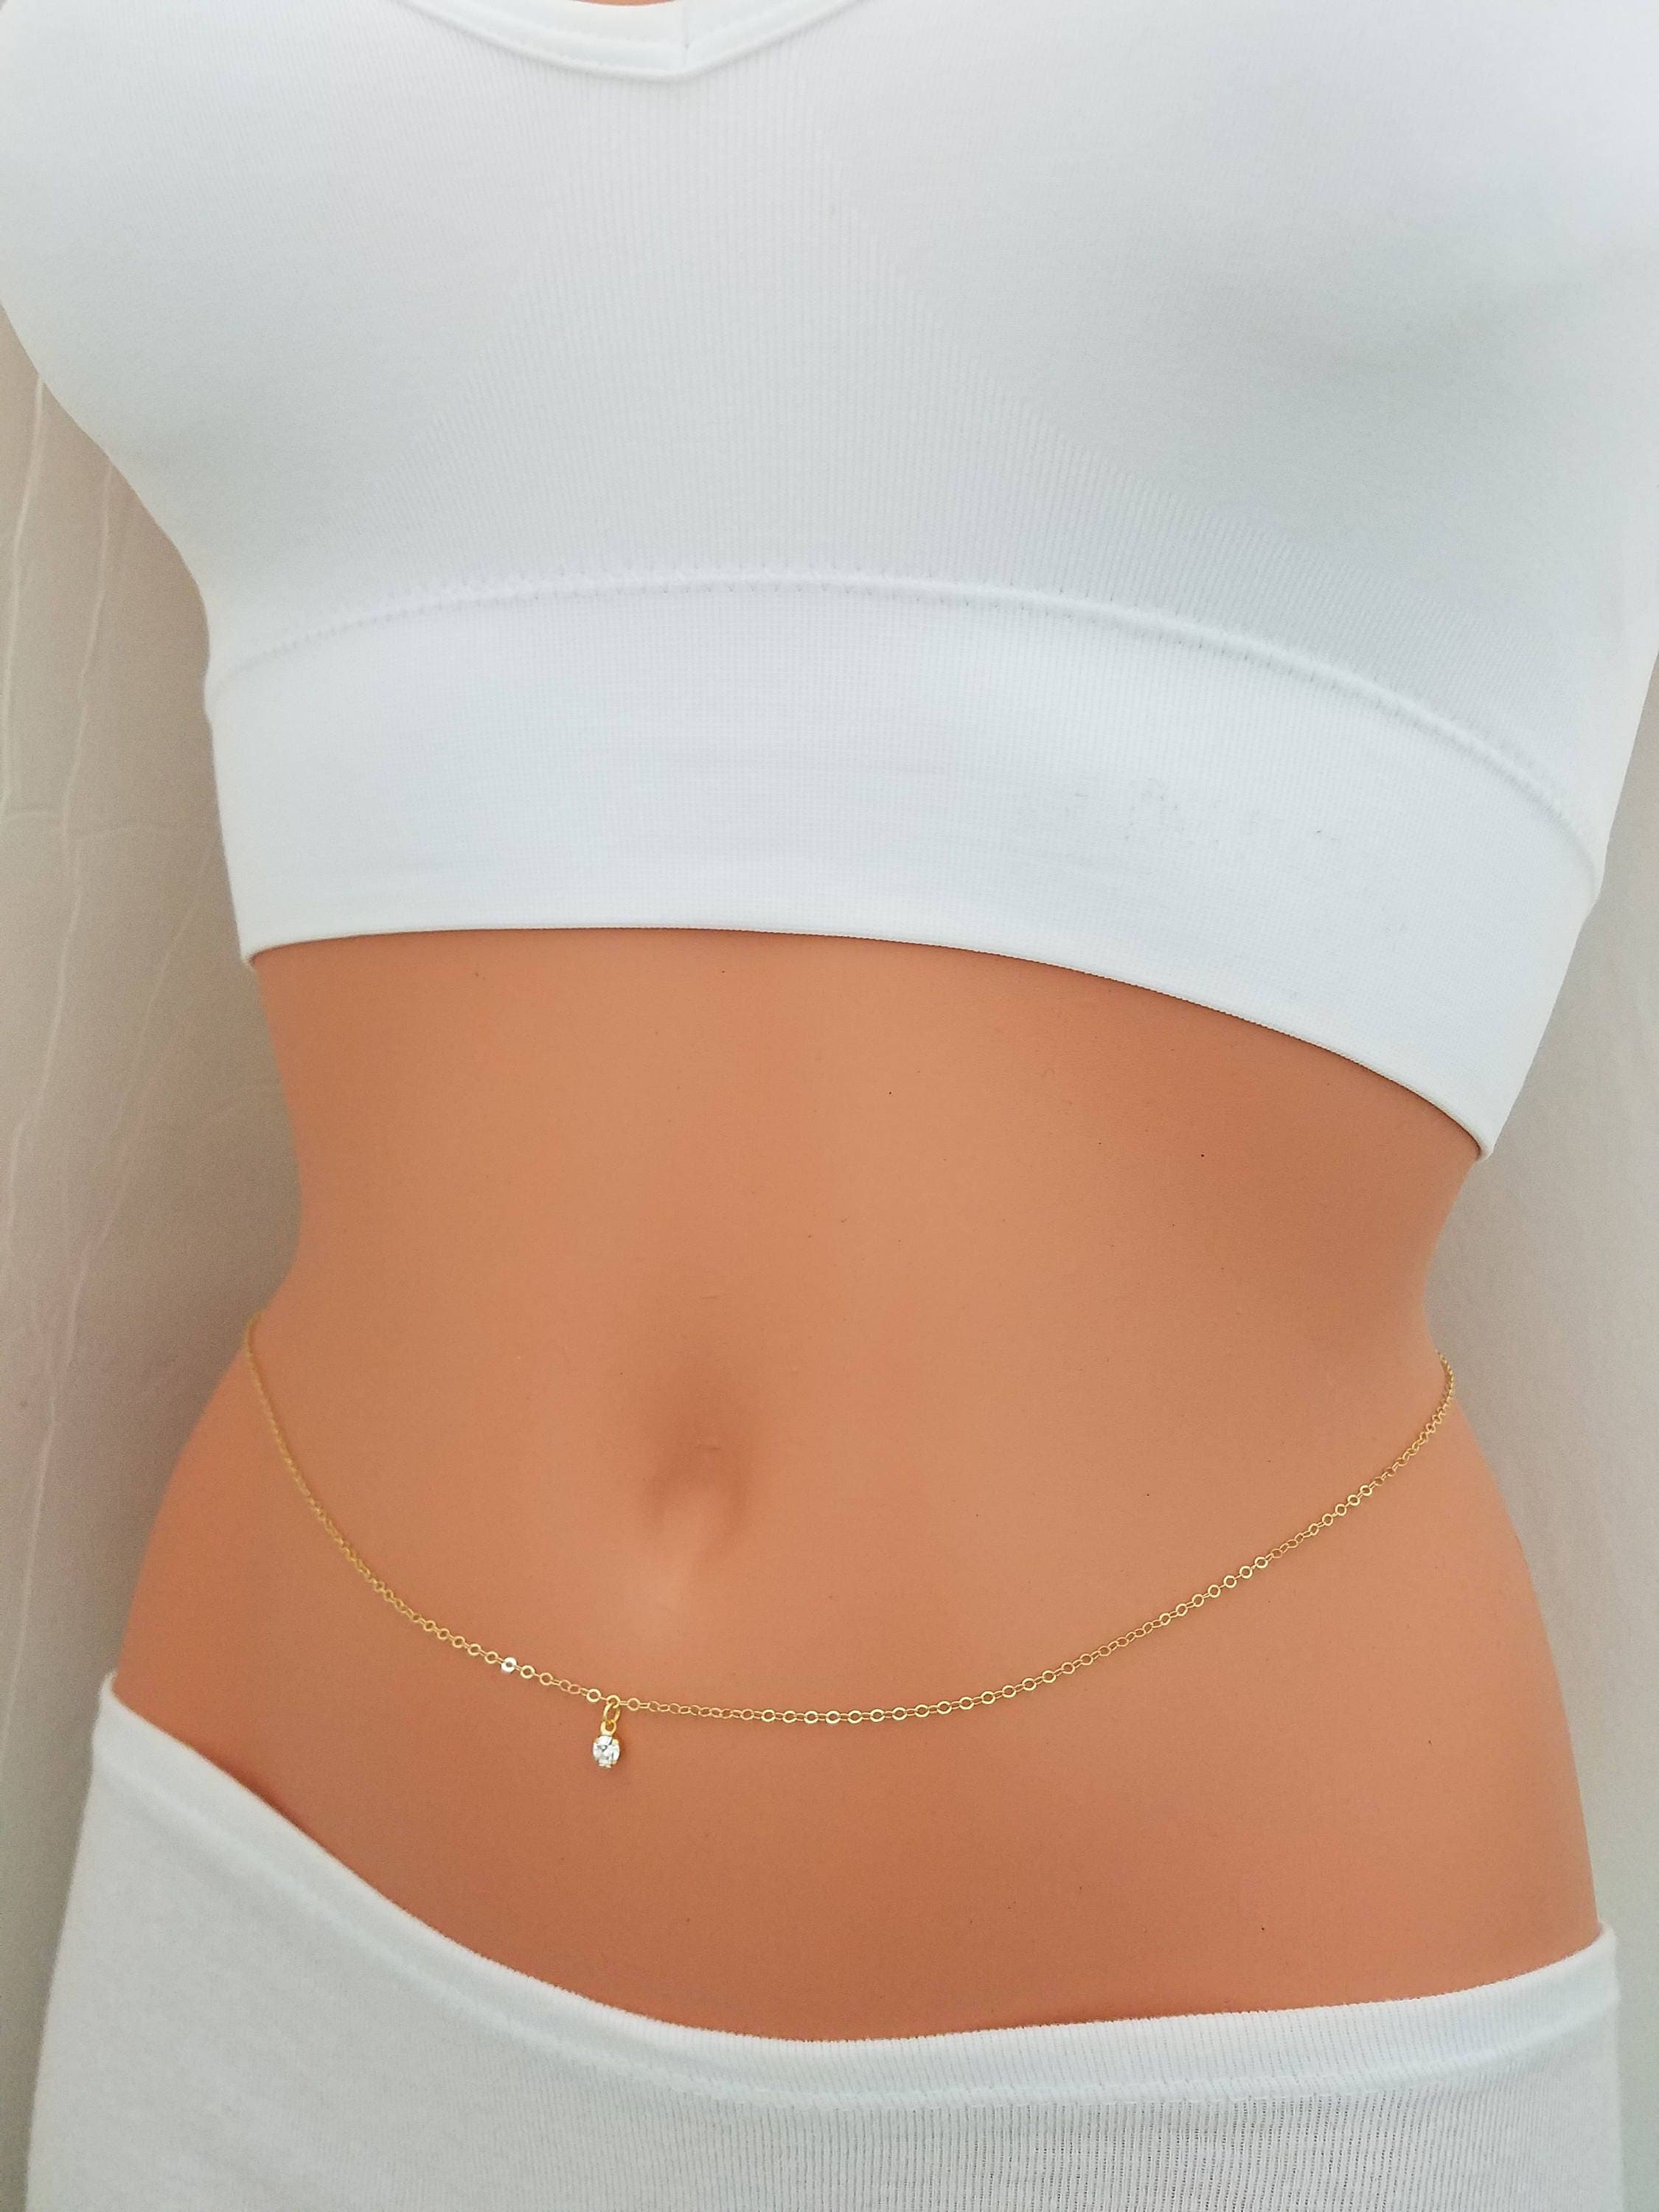 Cz Diamond Belly Chain Gold Belly Chain Belly Chain Body